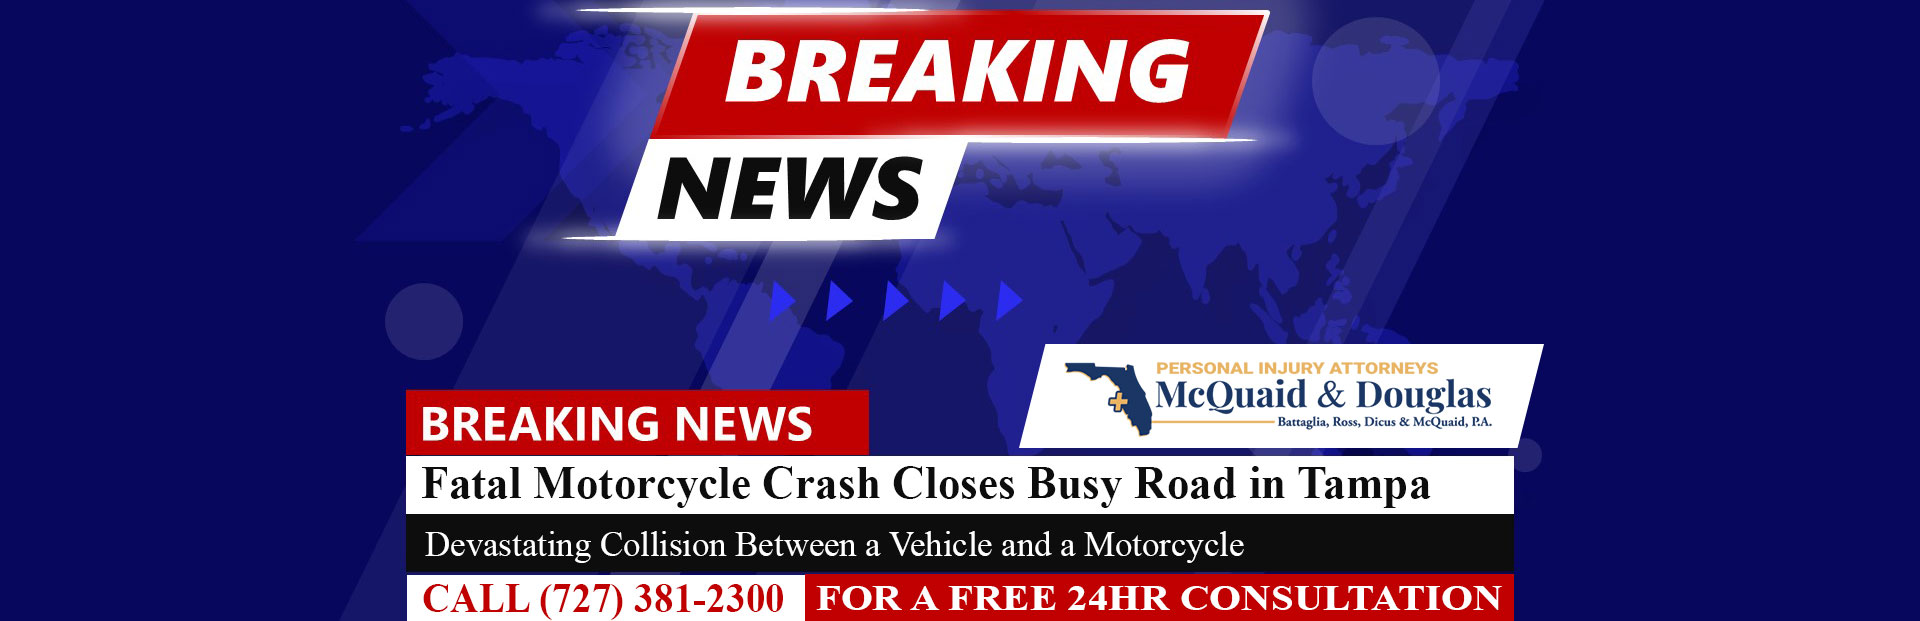 [06-20-24] Fatal Motorcycle Crash Closes Intersection at E Kennedy Blvd and N Florida Ave in Tampa